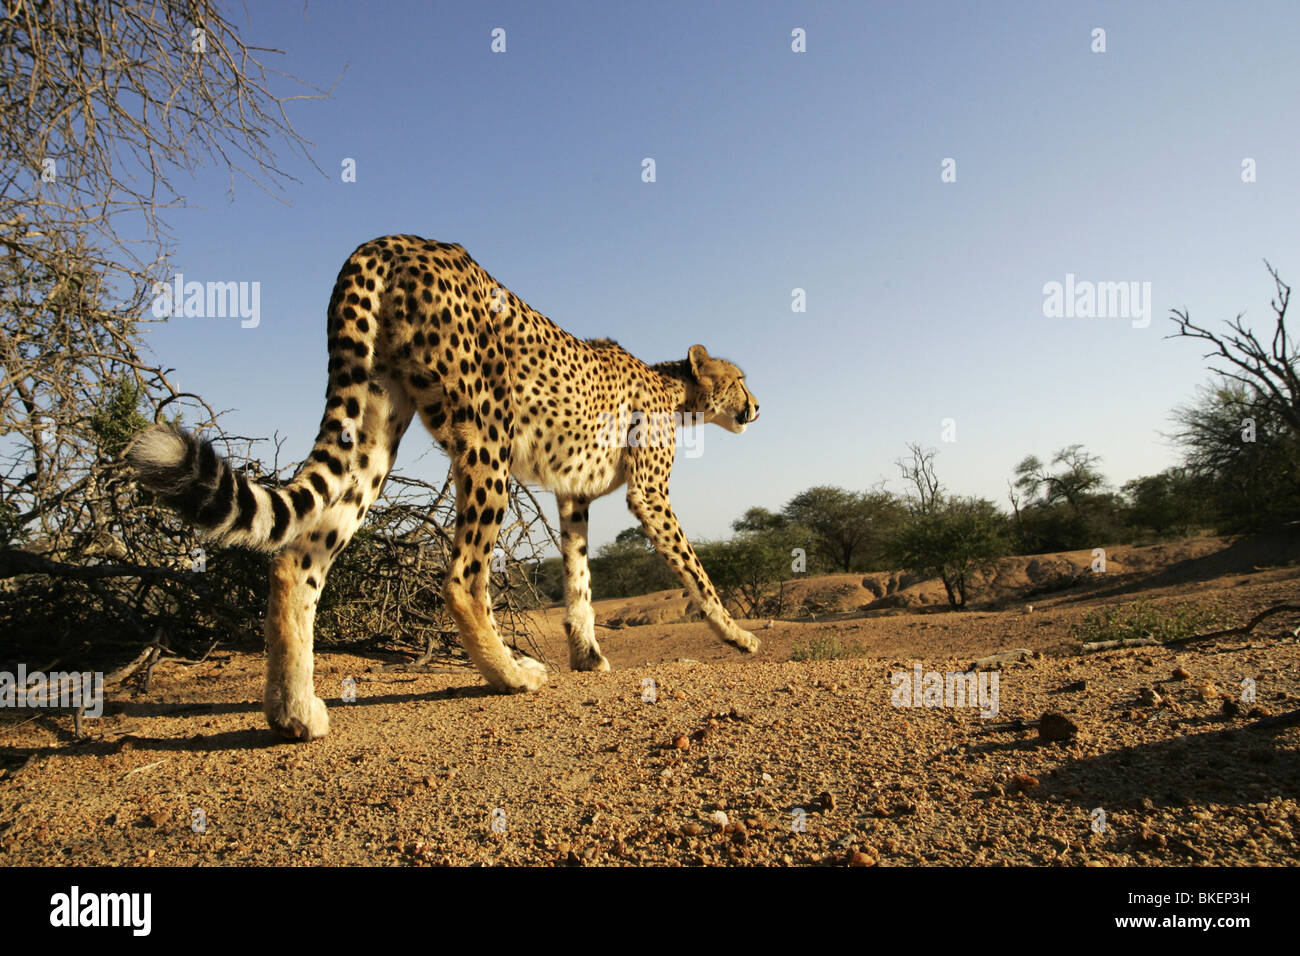 Wide Angle photo of a cheetah stalking Stock Photo